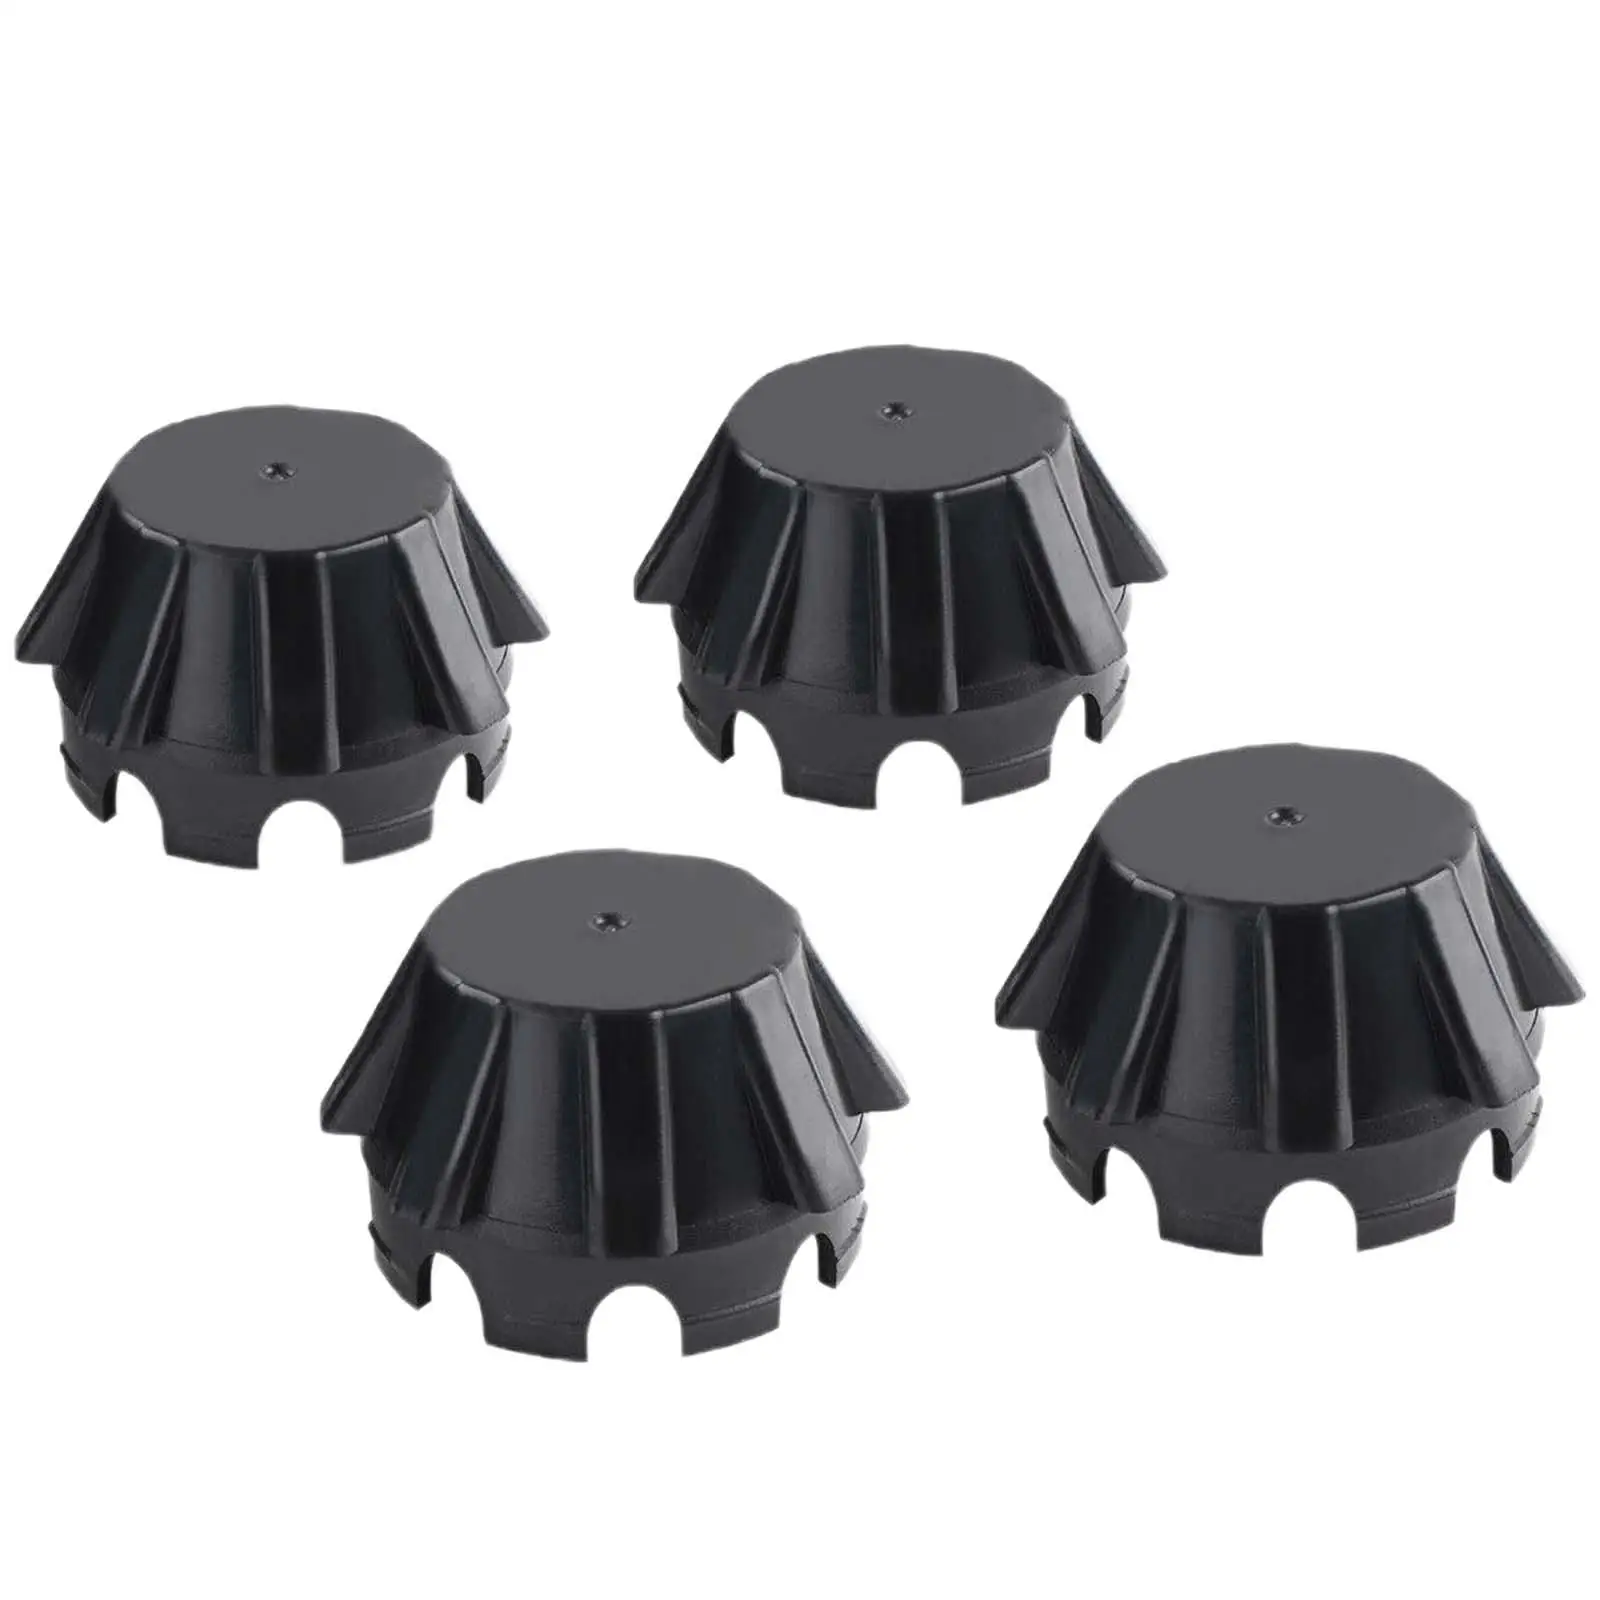 4x Wheel Center Hub Caps Cover Accessories for Kawasaki Krx 1000 High Reliability Sturdy Professional Stable Performance